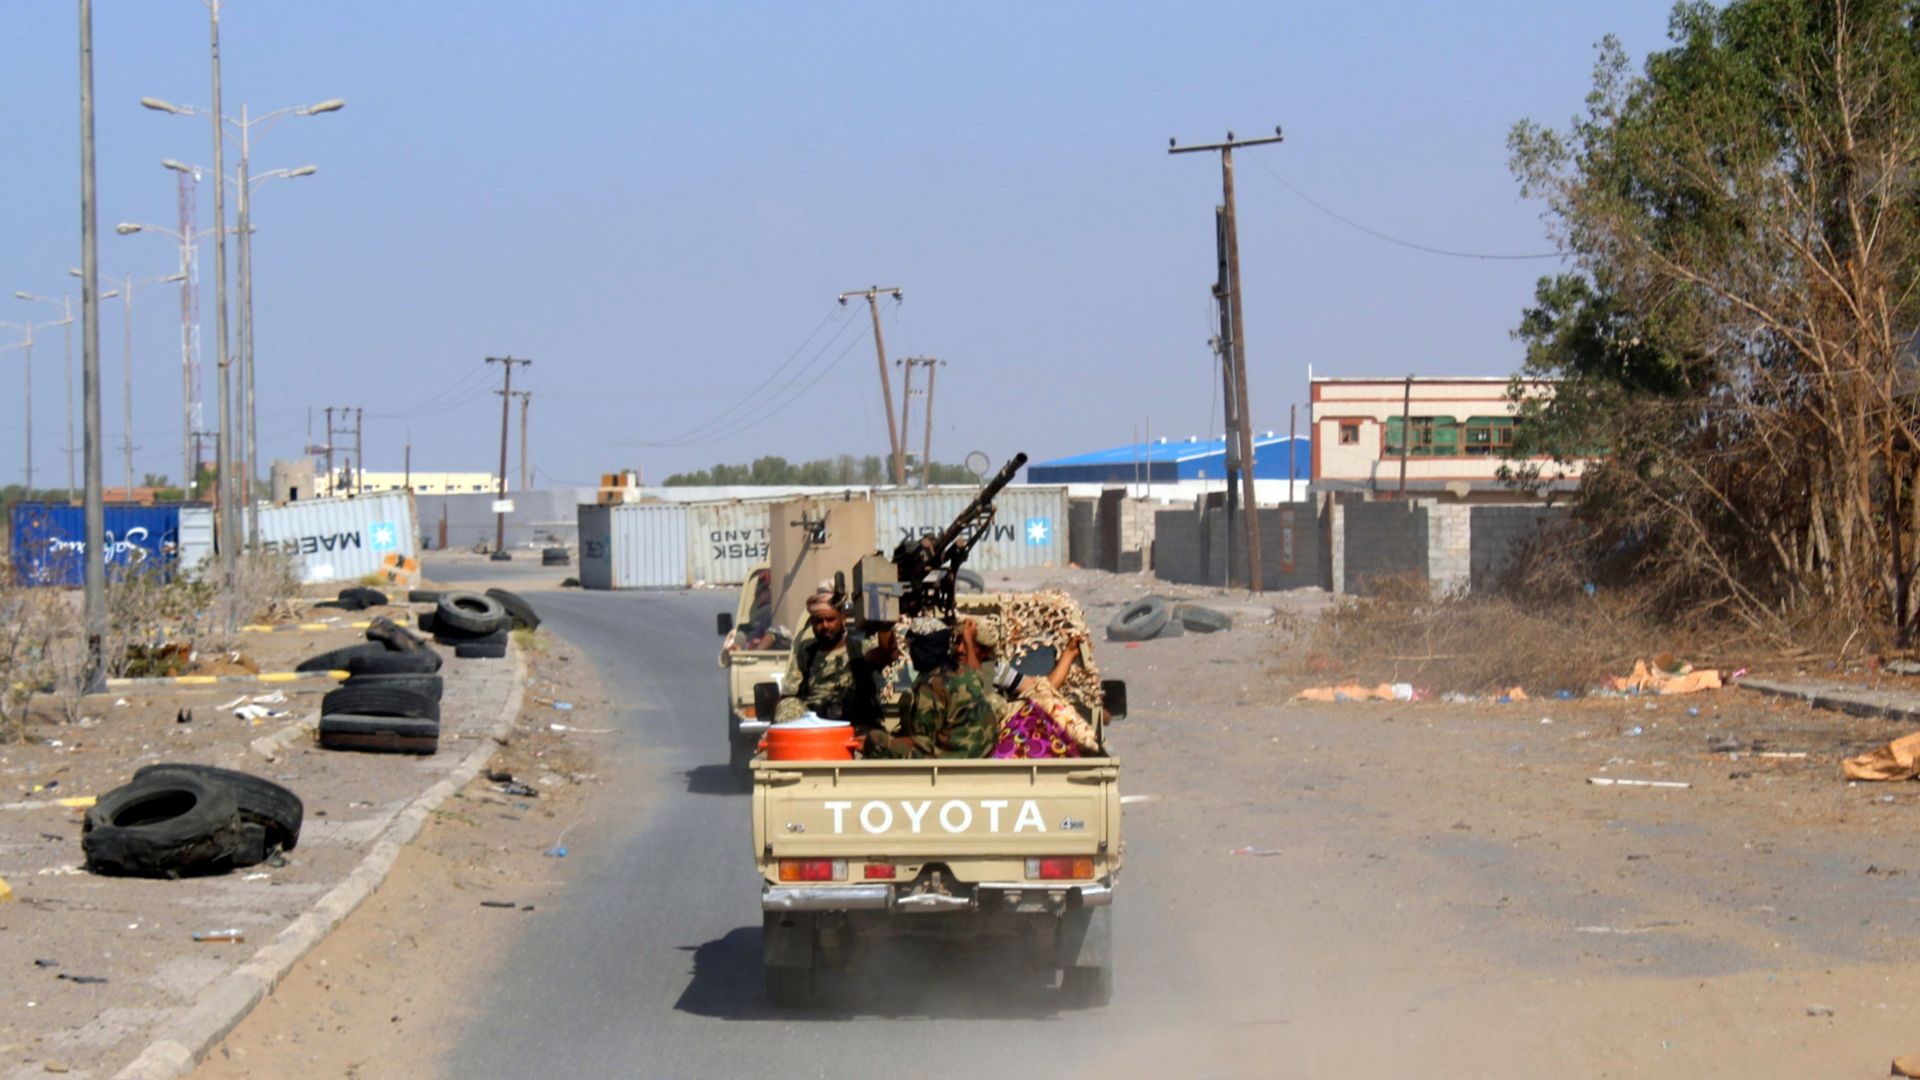 Yemeni government fighters in a truck on an empty, dusty road